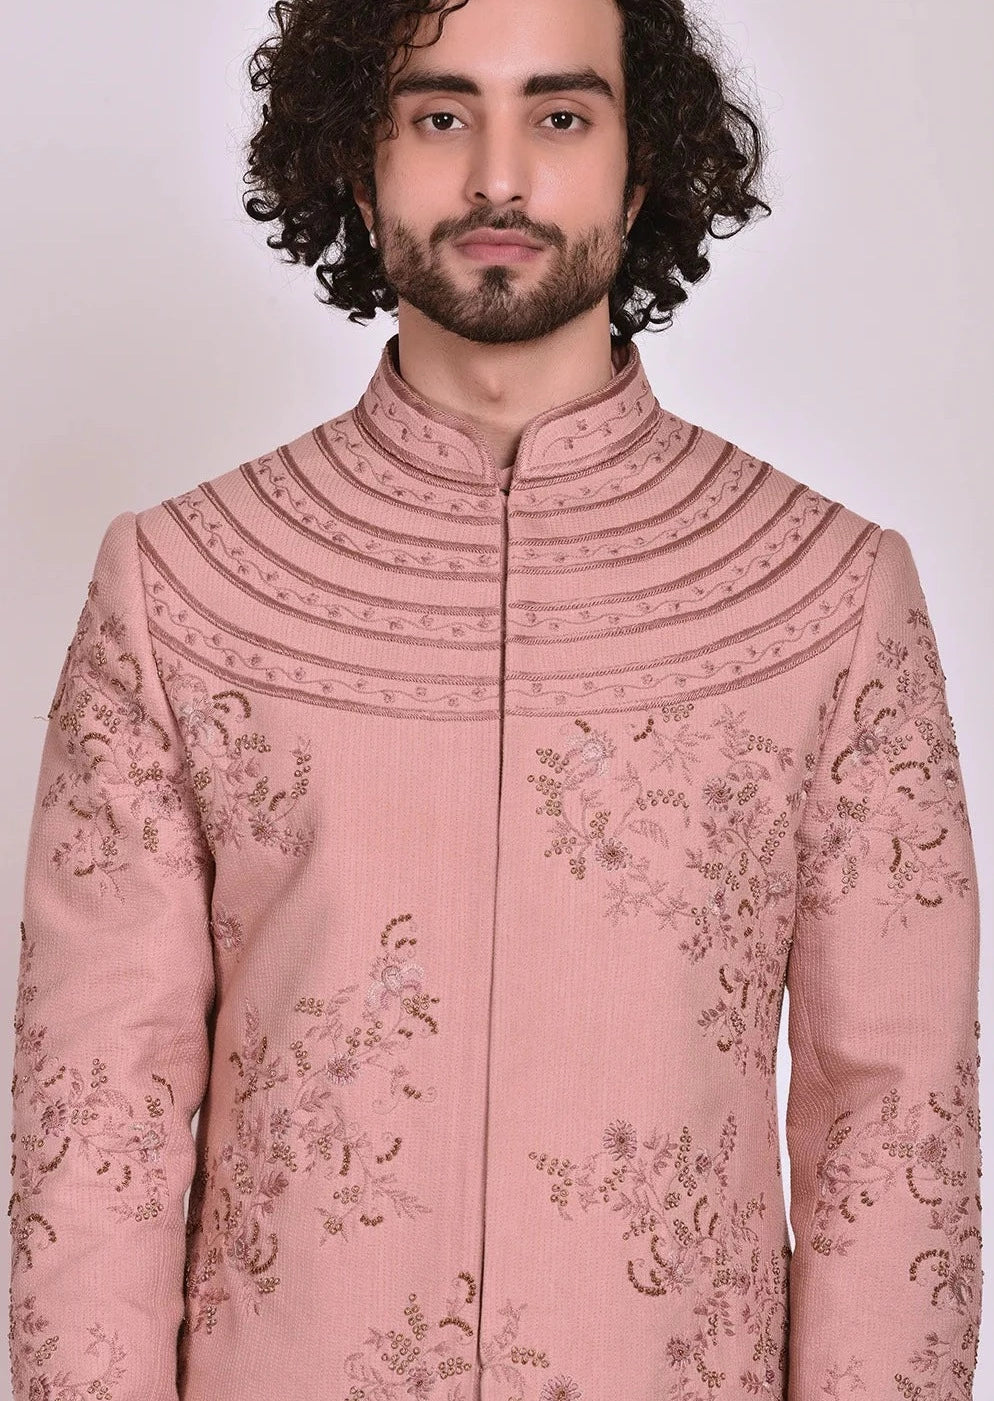 Old Rose Contemporary Sherwani | Ready to Ship